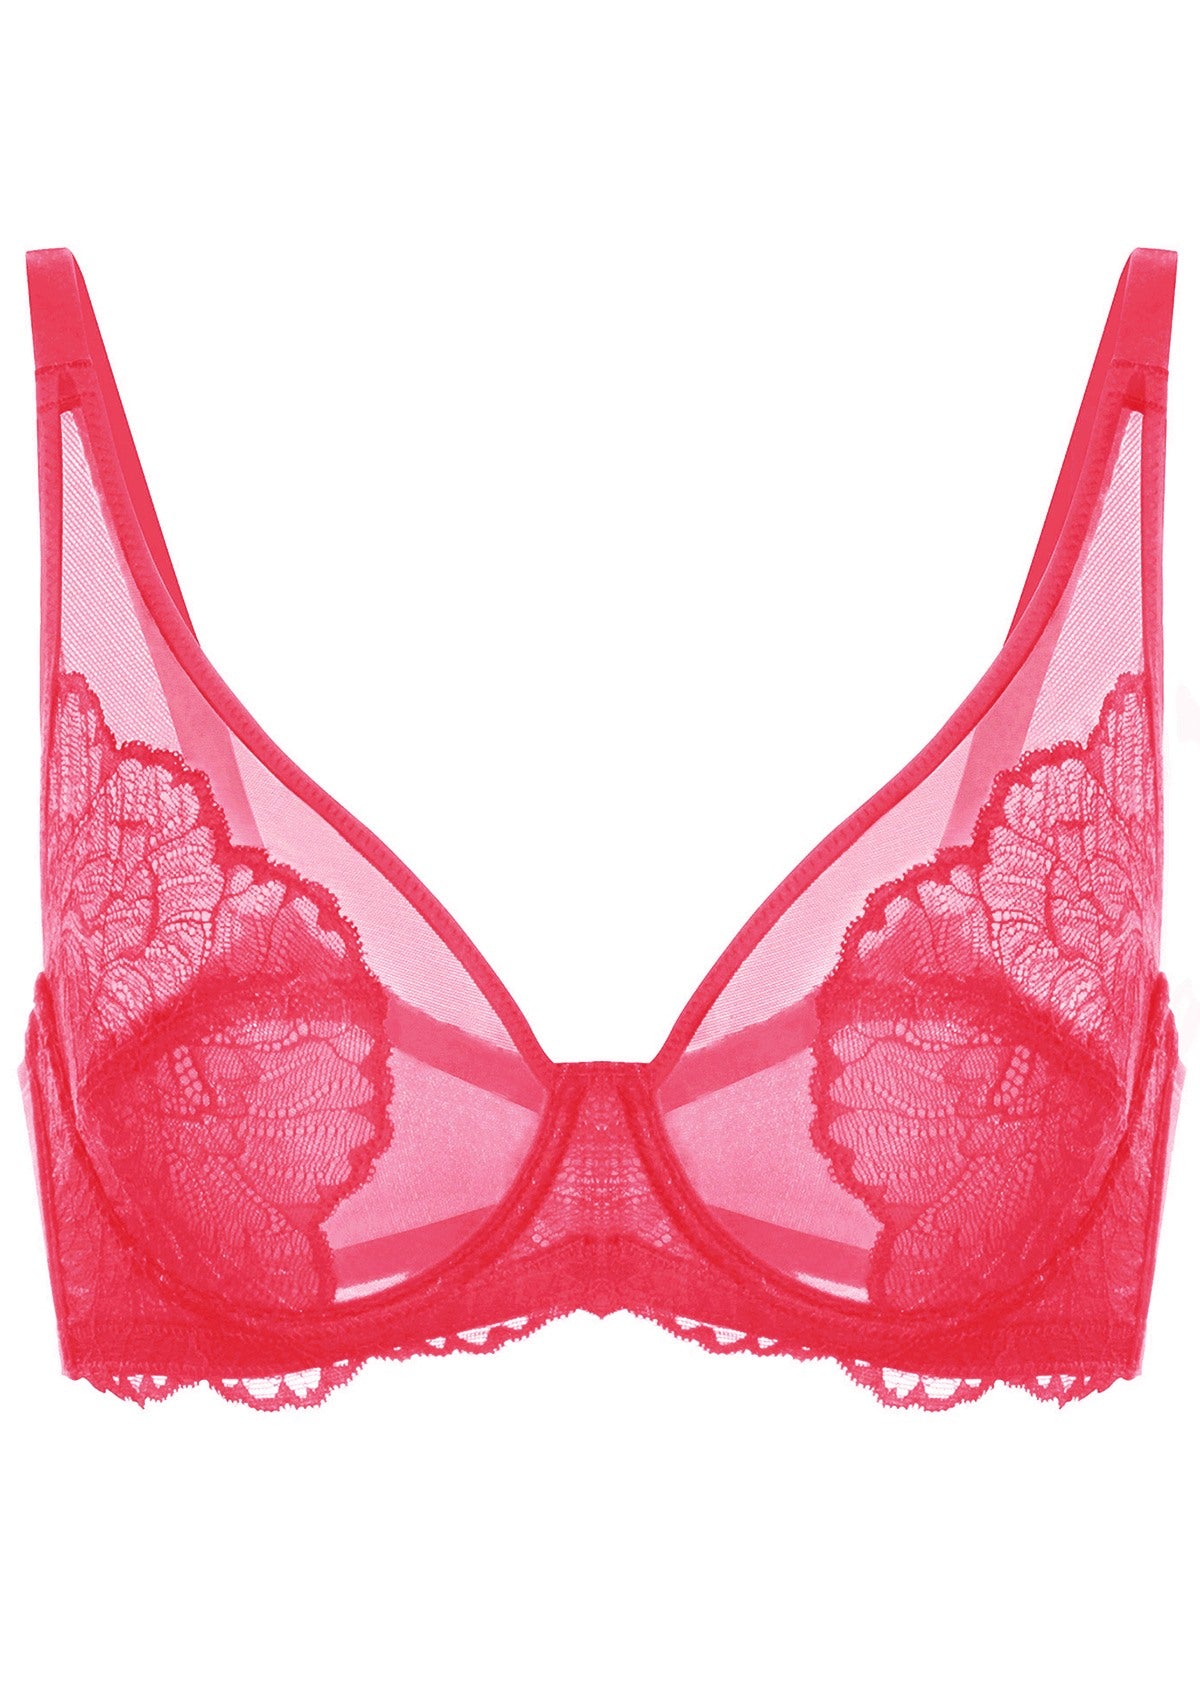 HSIA Blossom Unlined Lace Underwire Bra - Raspberry / 44 / D